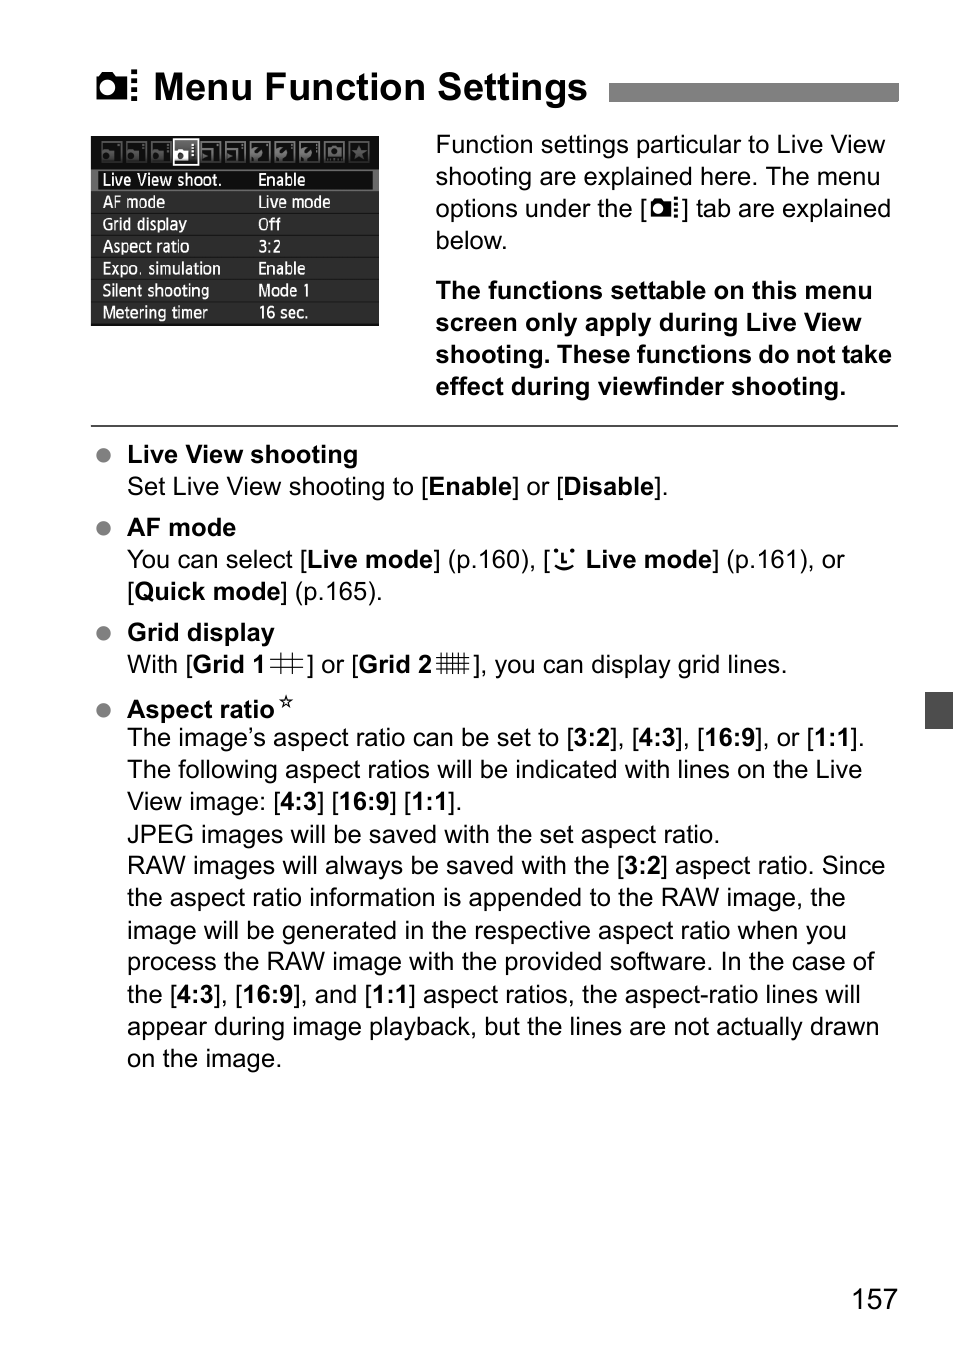 Menu function settings, Z menu function settings | Canon EOS 60D User Manual | Page 157 / 320